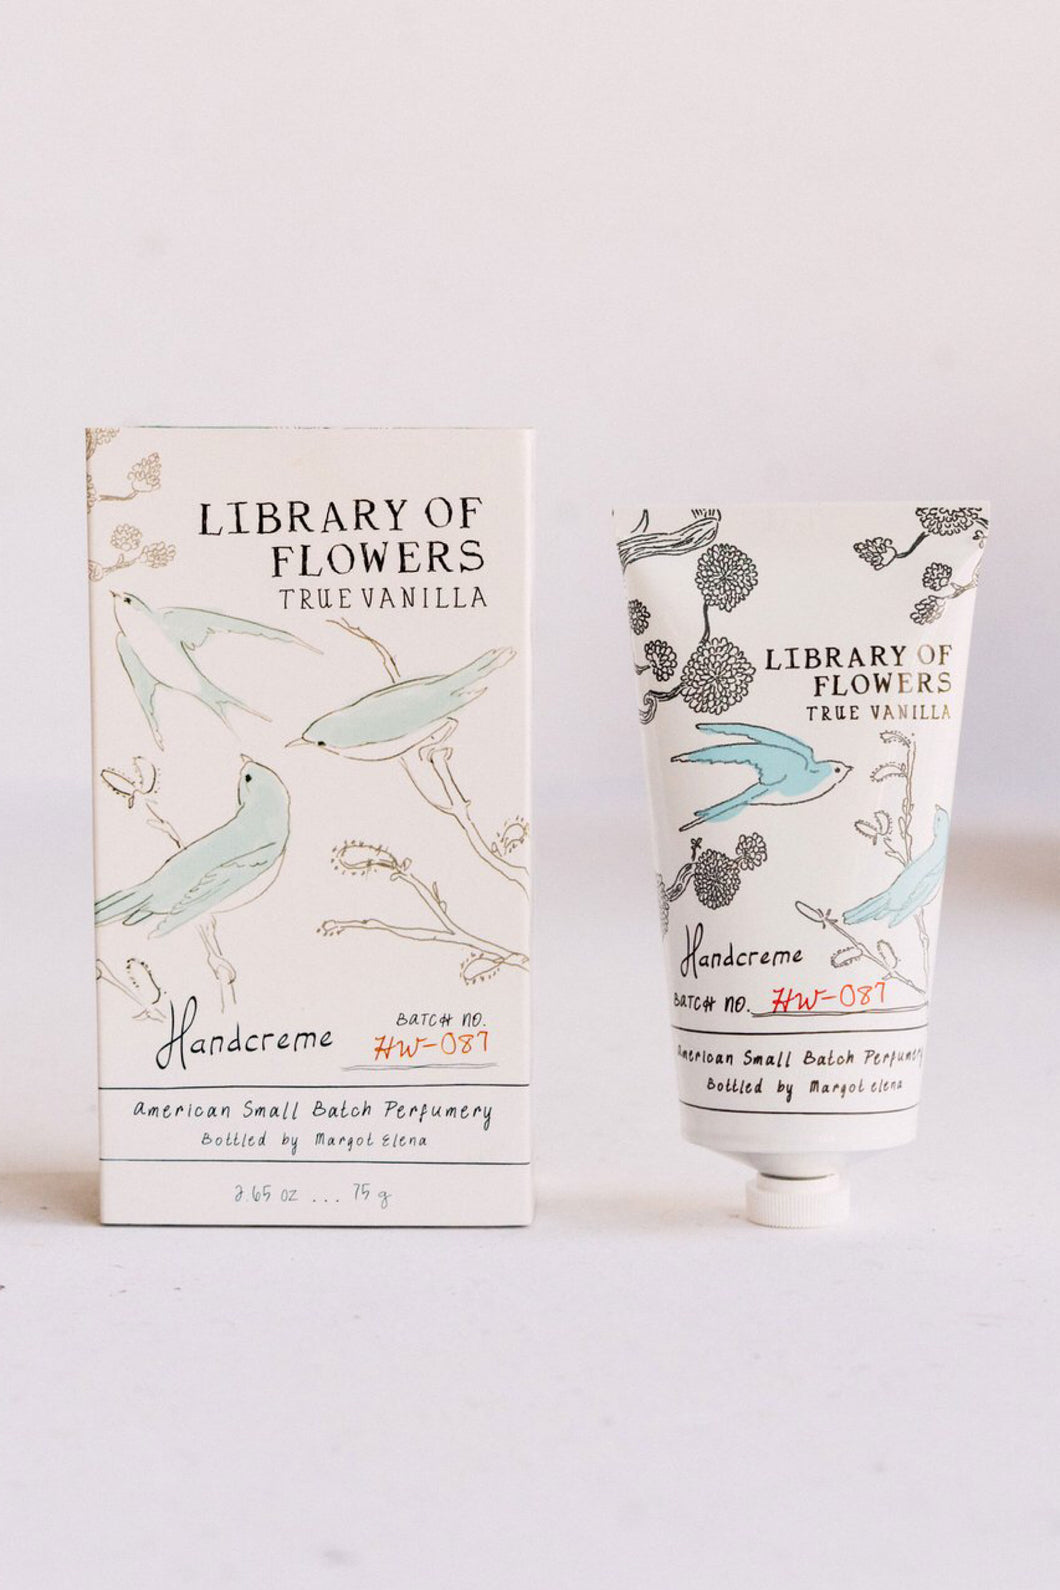 LIBRARY OF FLOWERS HANDCREME